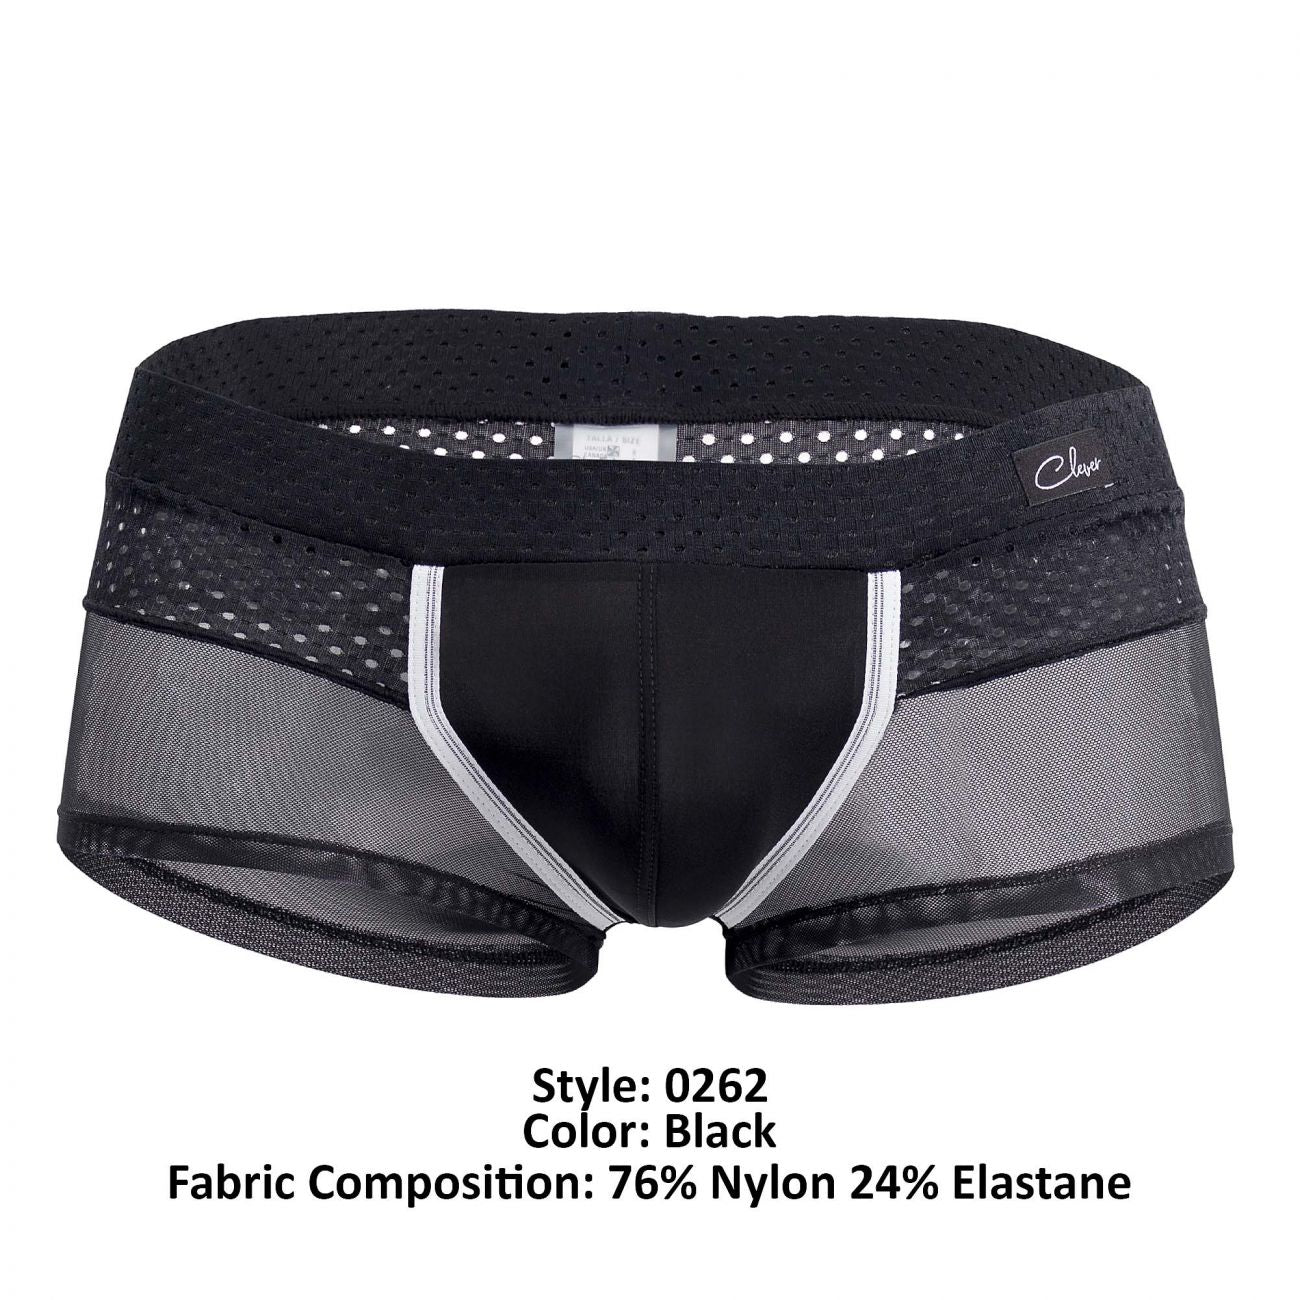 Clever 0262 Control Latin Trunks Black